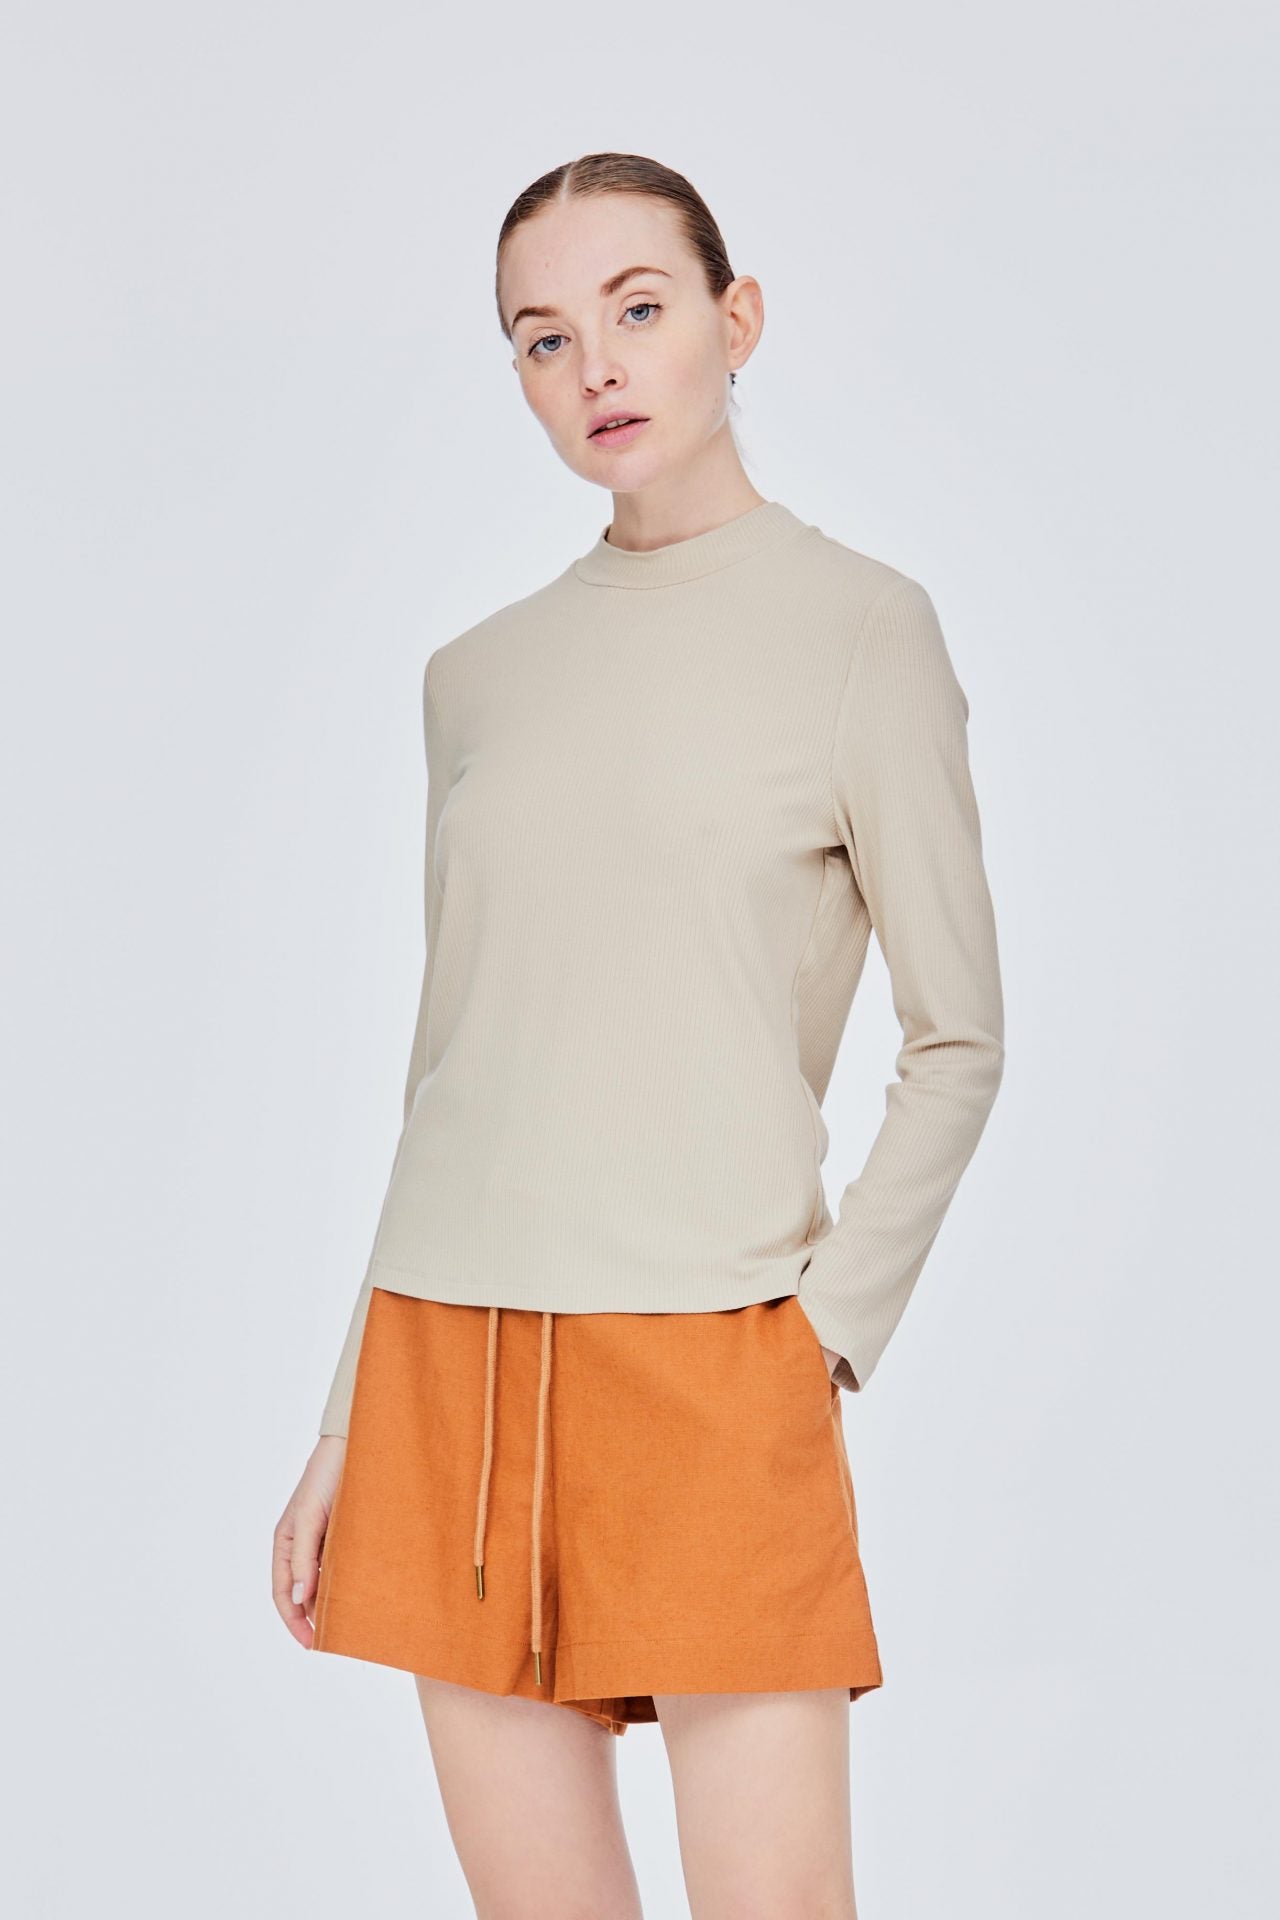 BT 11702 RELAXED PULLOVER BEIGE